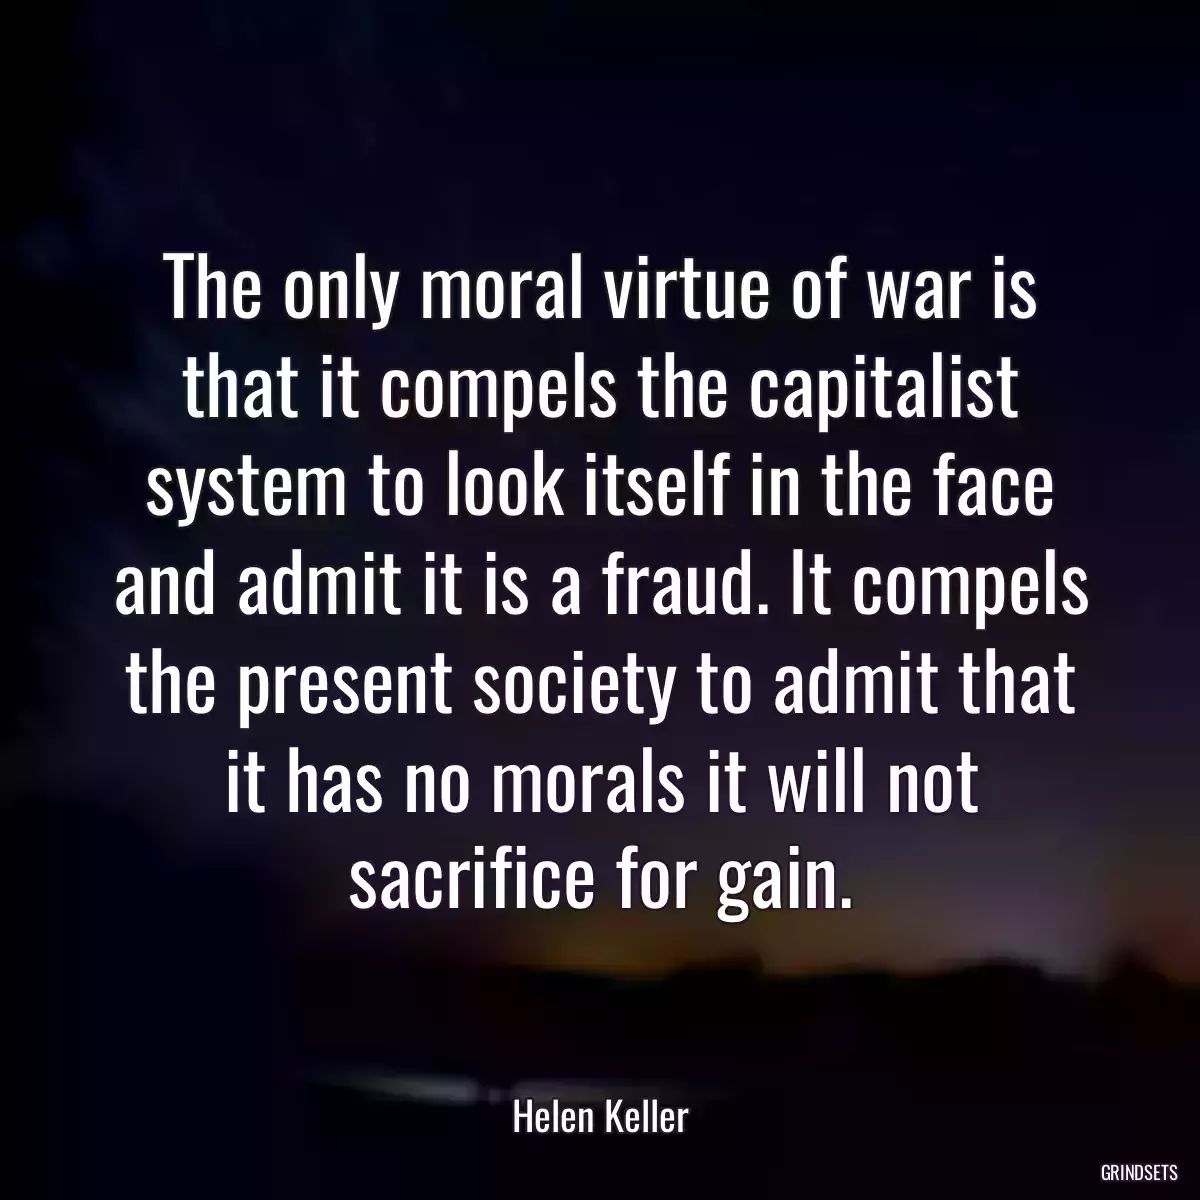 The only moral virtue of war is that it compels the capitalist system to look itself in the face and admit it is a fraud. It compels the present society to admit that it has no morals it will not sacrifice for gain.